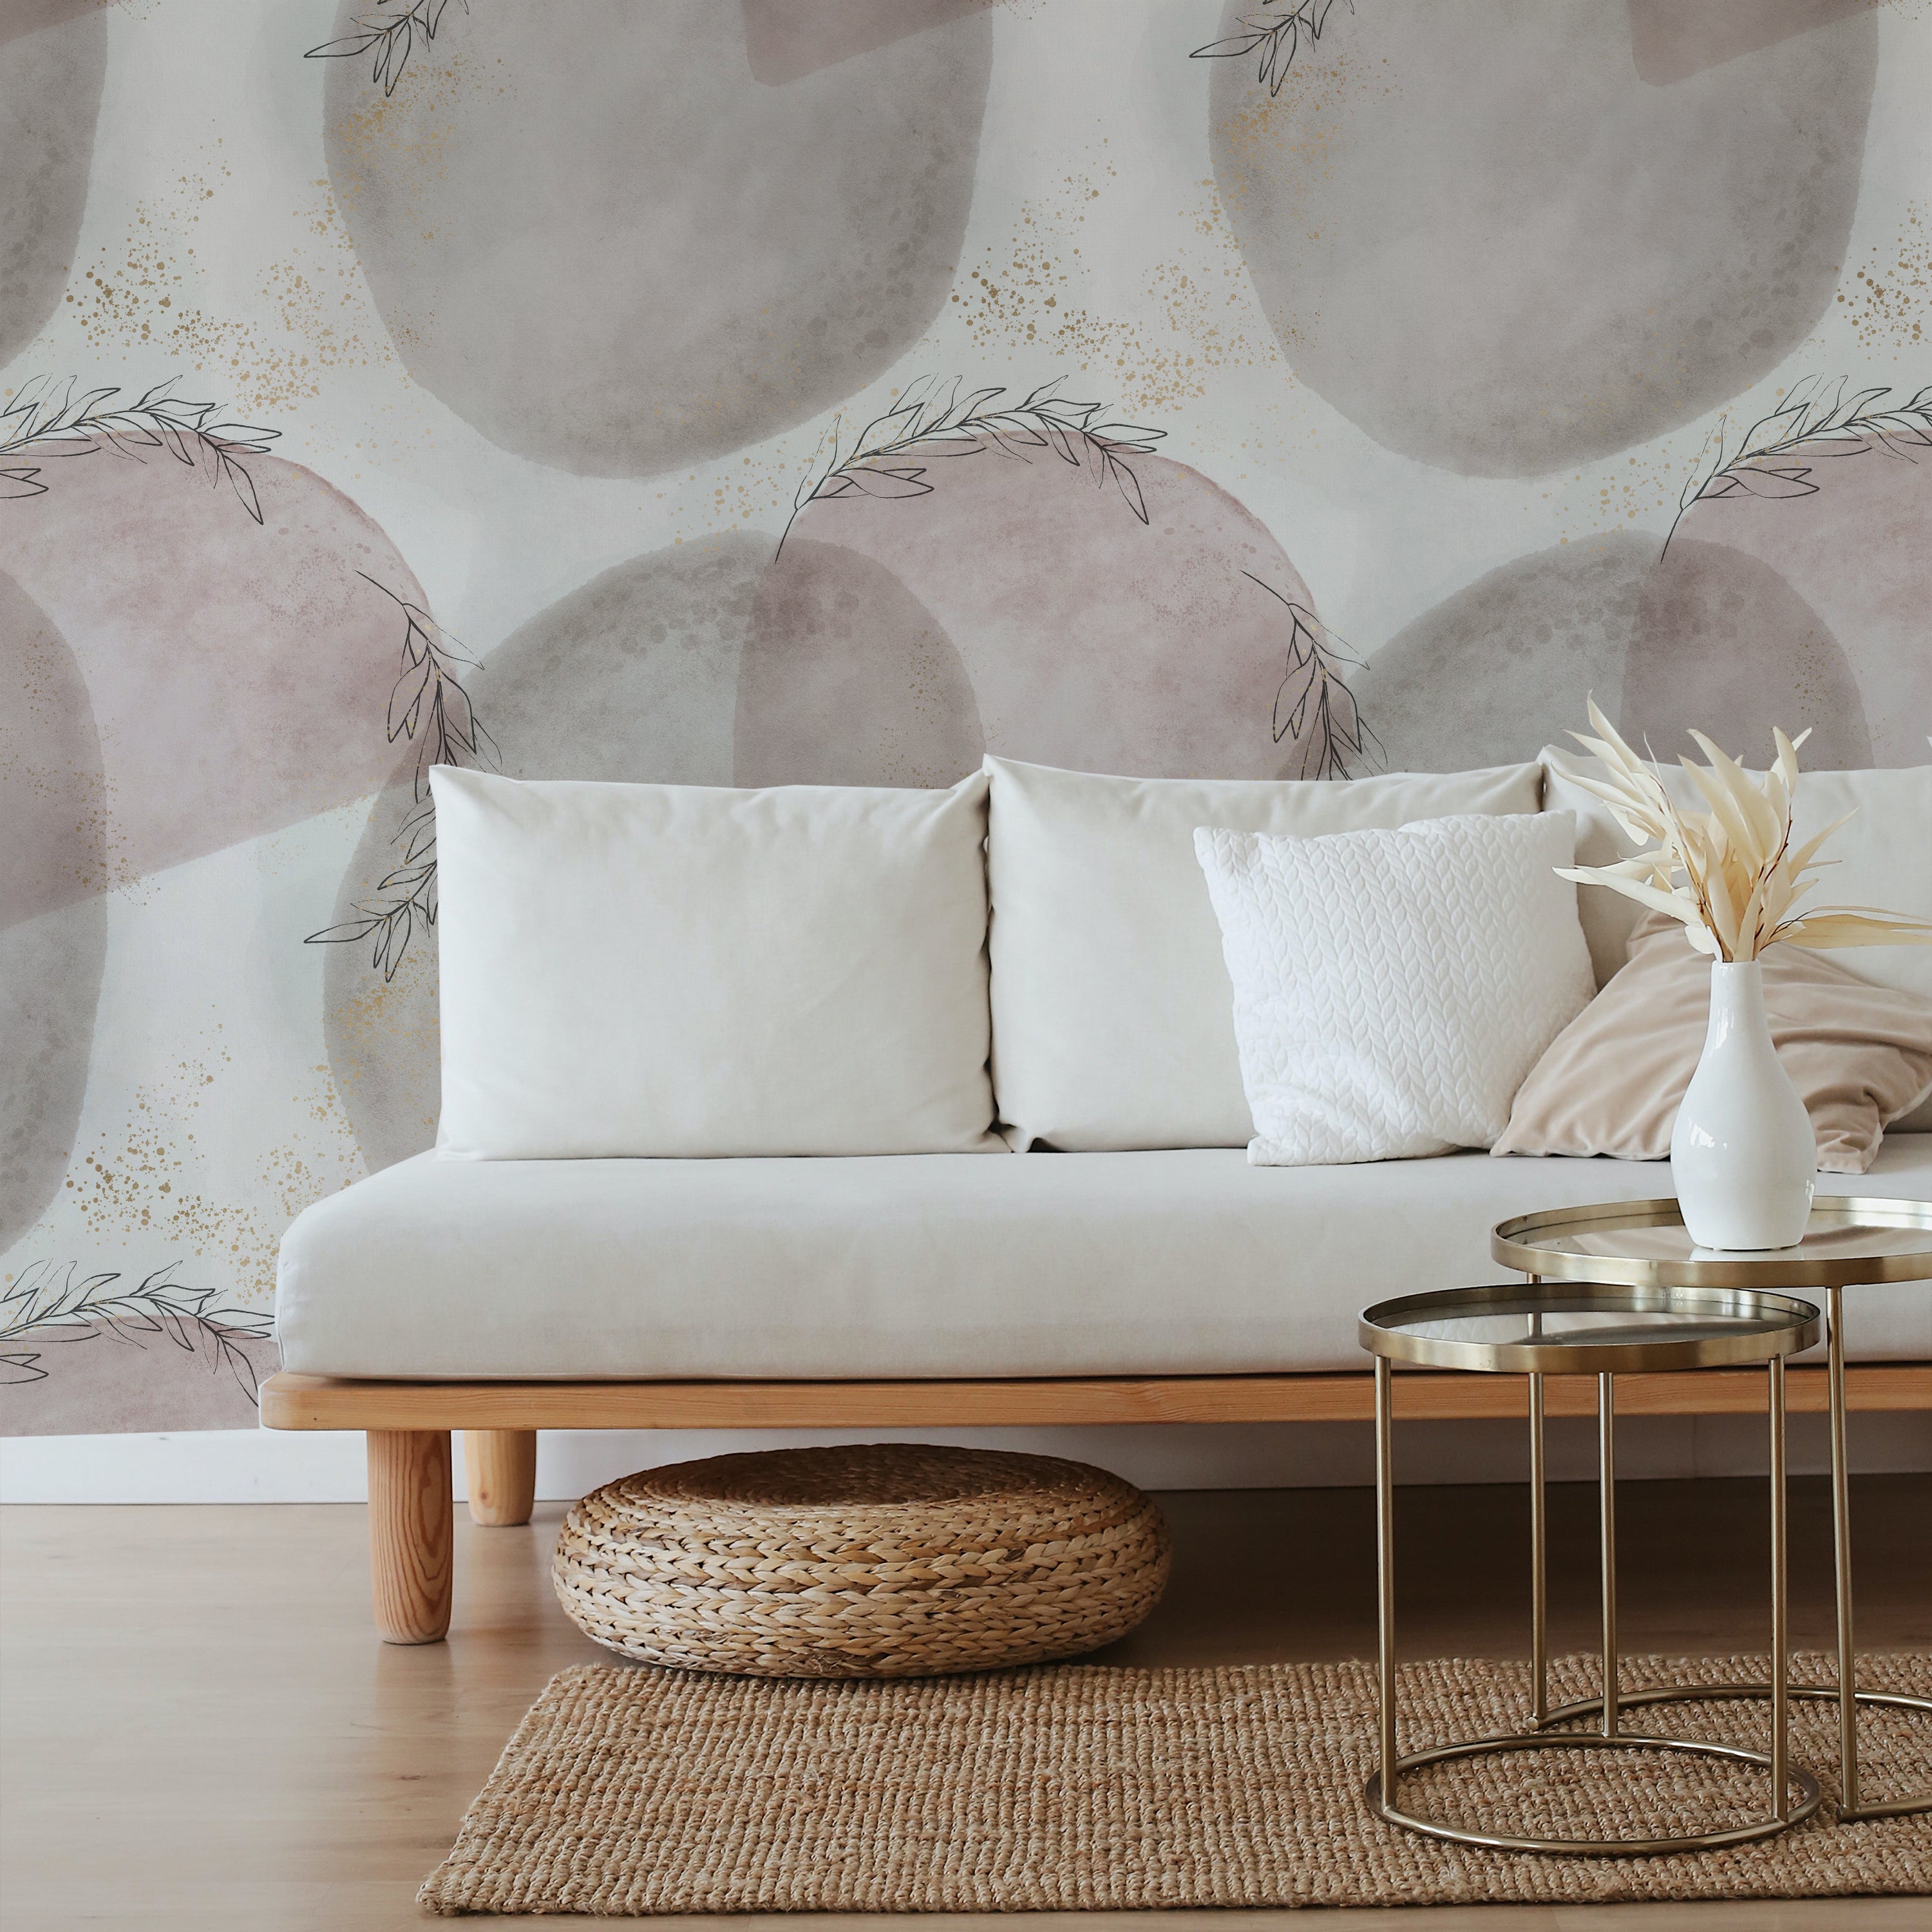 A contemporary living room beautifully accented with Shimmer and Paint Wallpaper. The wallpaper's gentle pink and grey tones complemented by golden speckles create a warm and inviting ambiance, perfect for a relaxing and stylish environment.